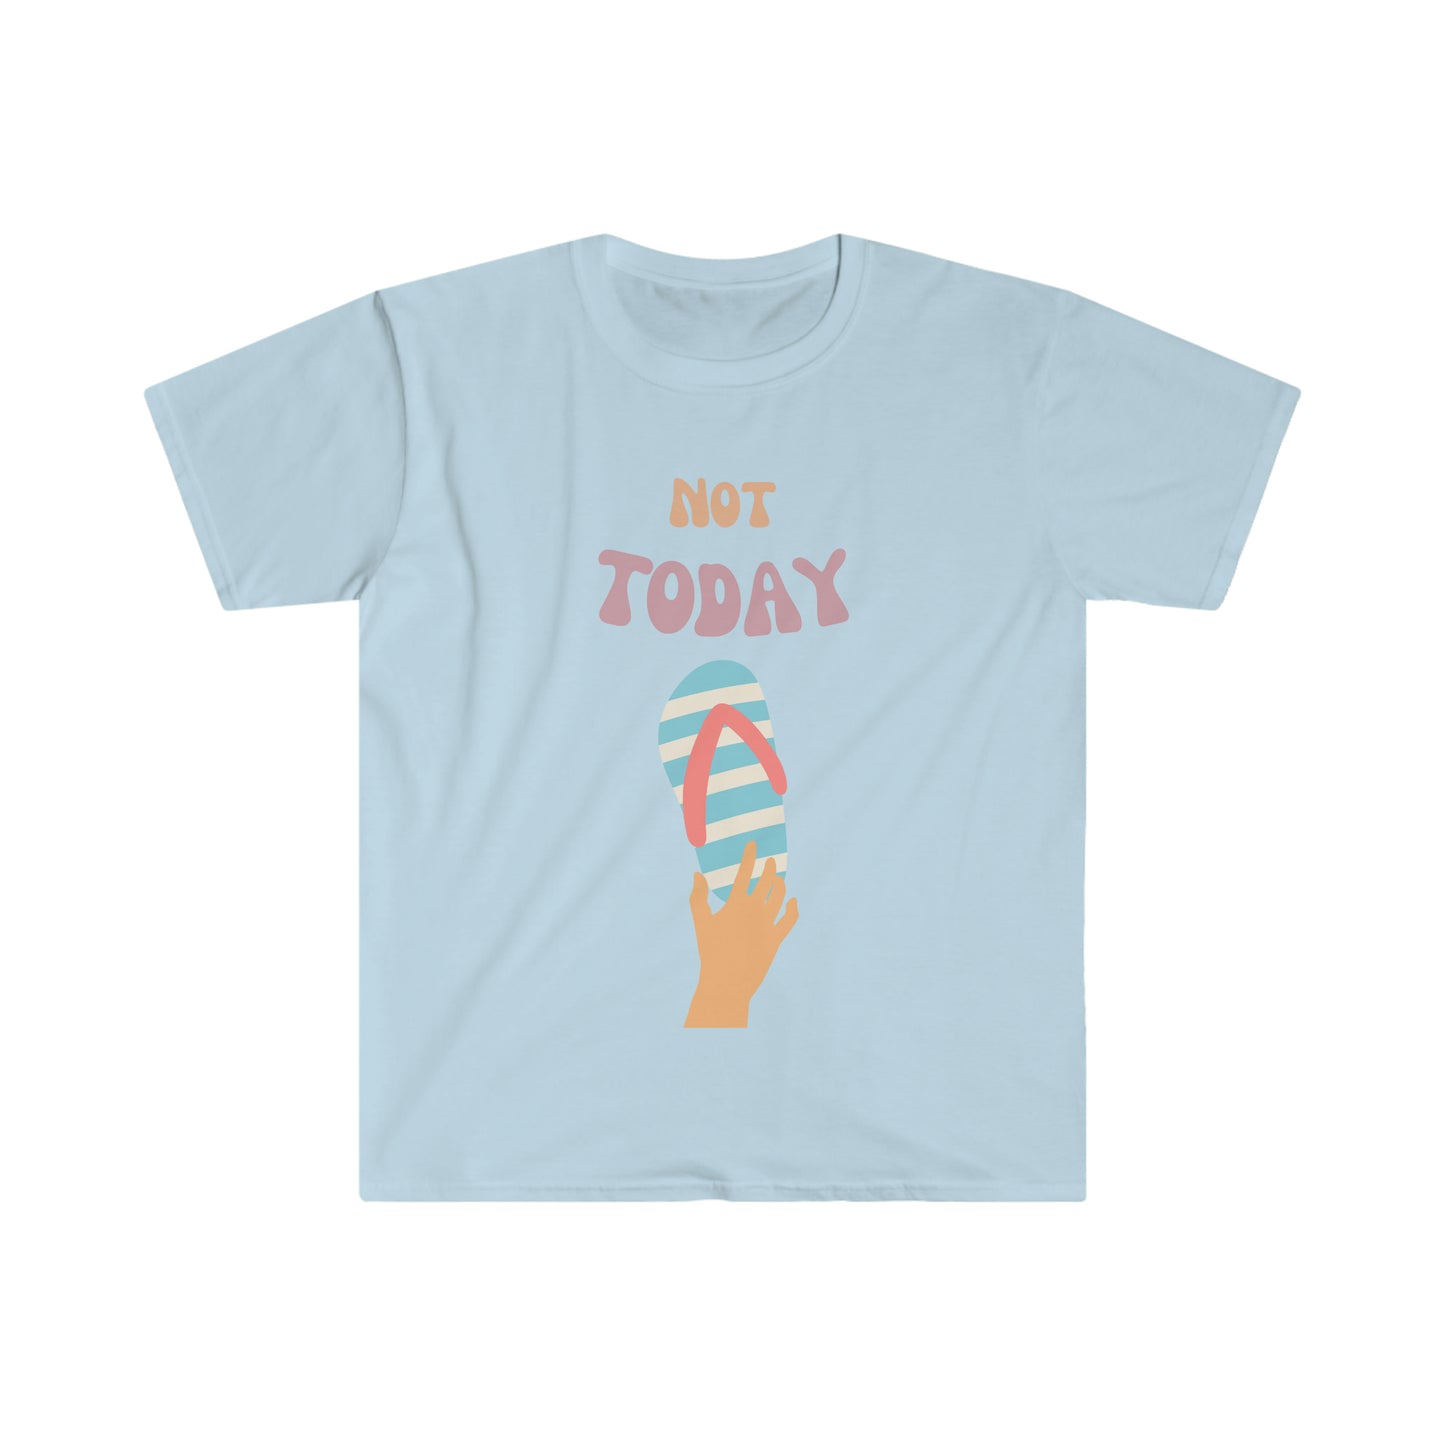 Not Today Shirt, Not Today T-Shirt, One Slipper Soft Shirt, Funny Mom Gift!